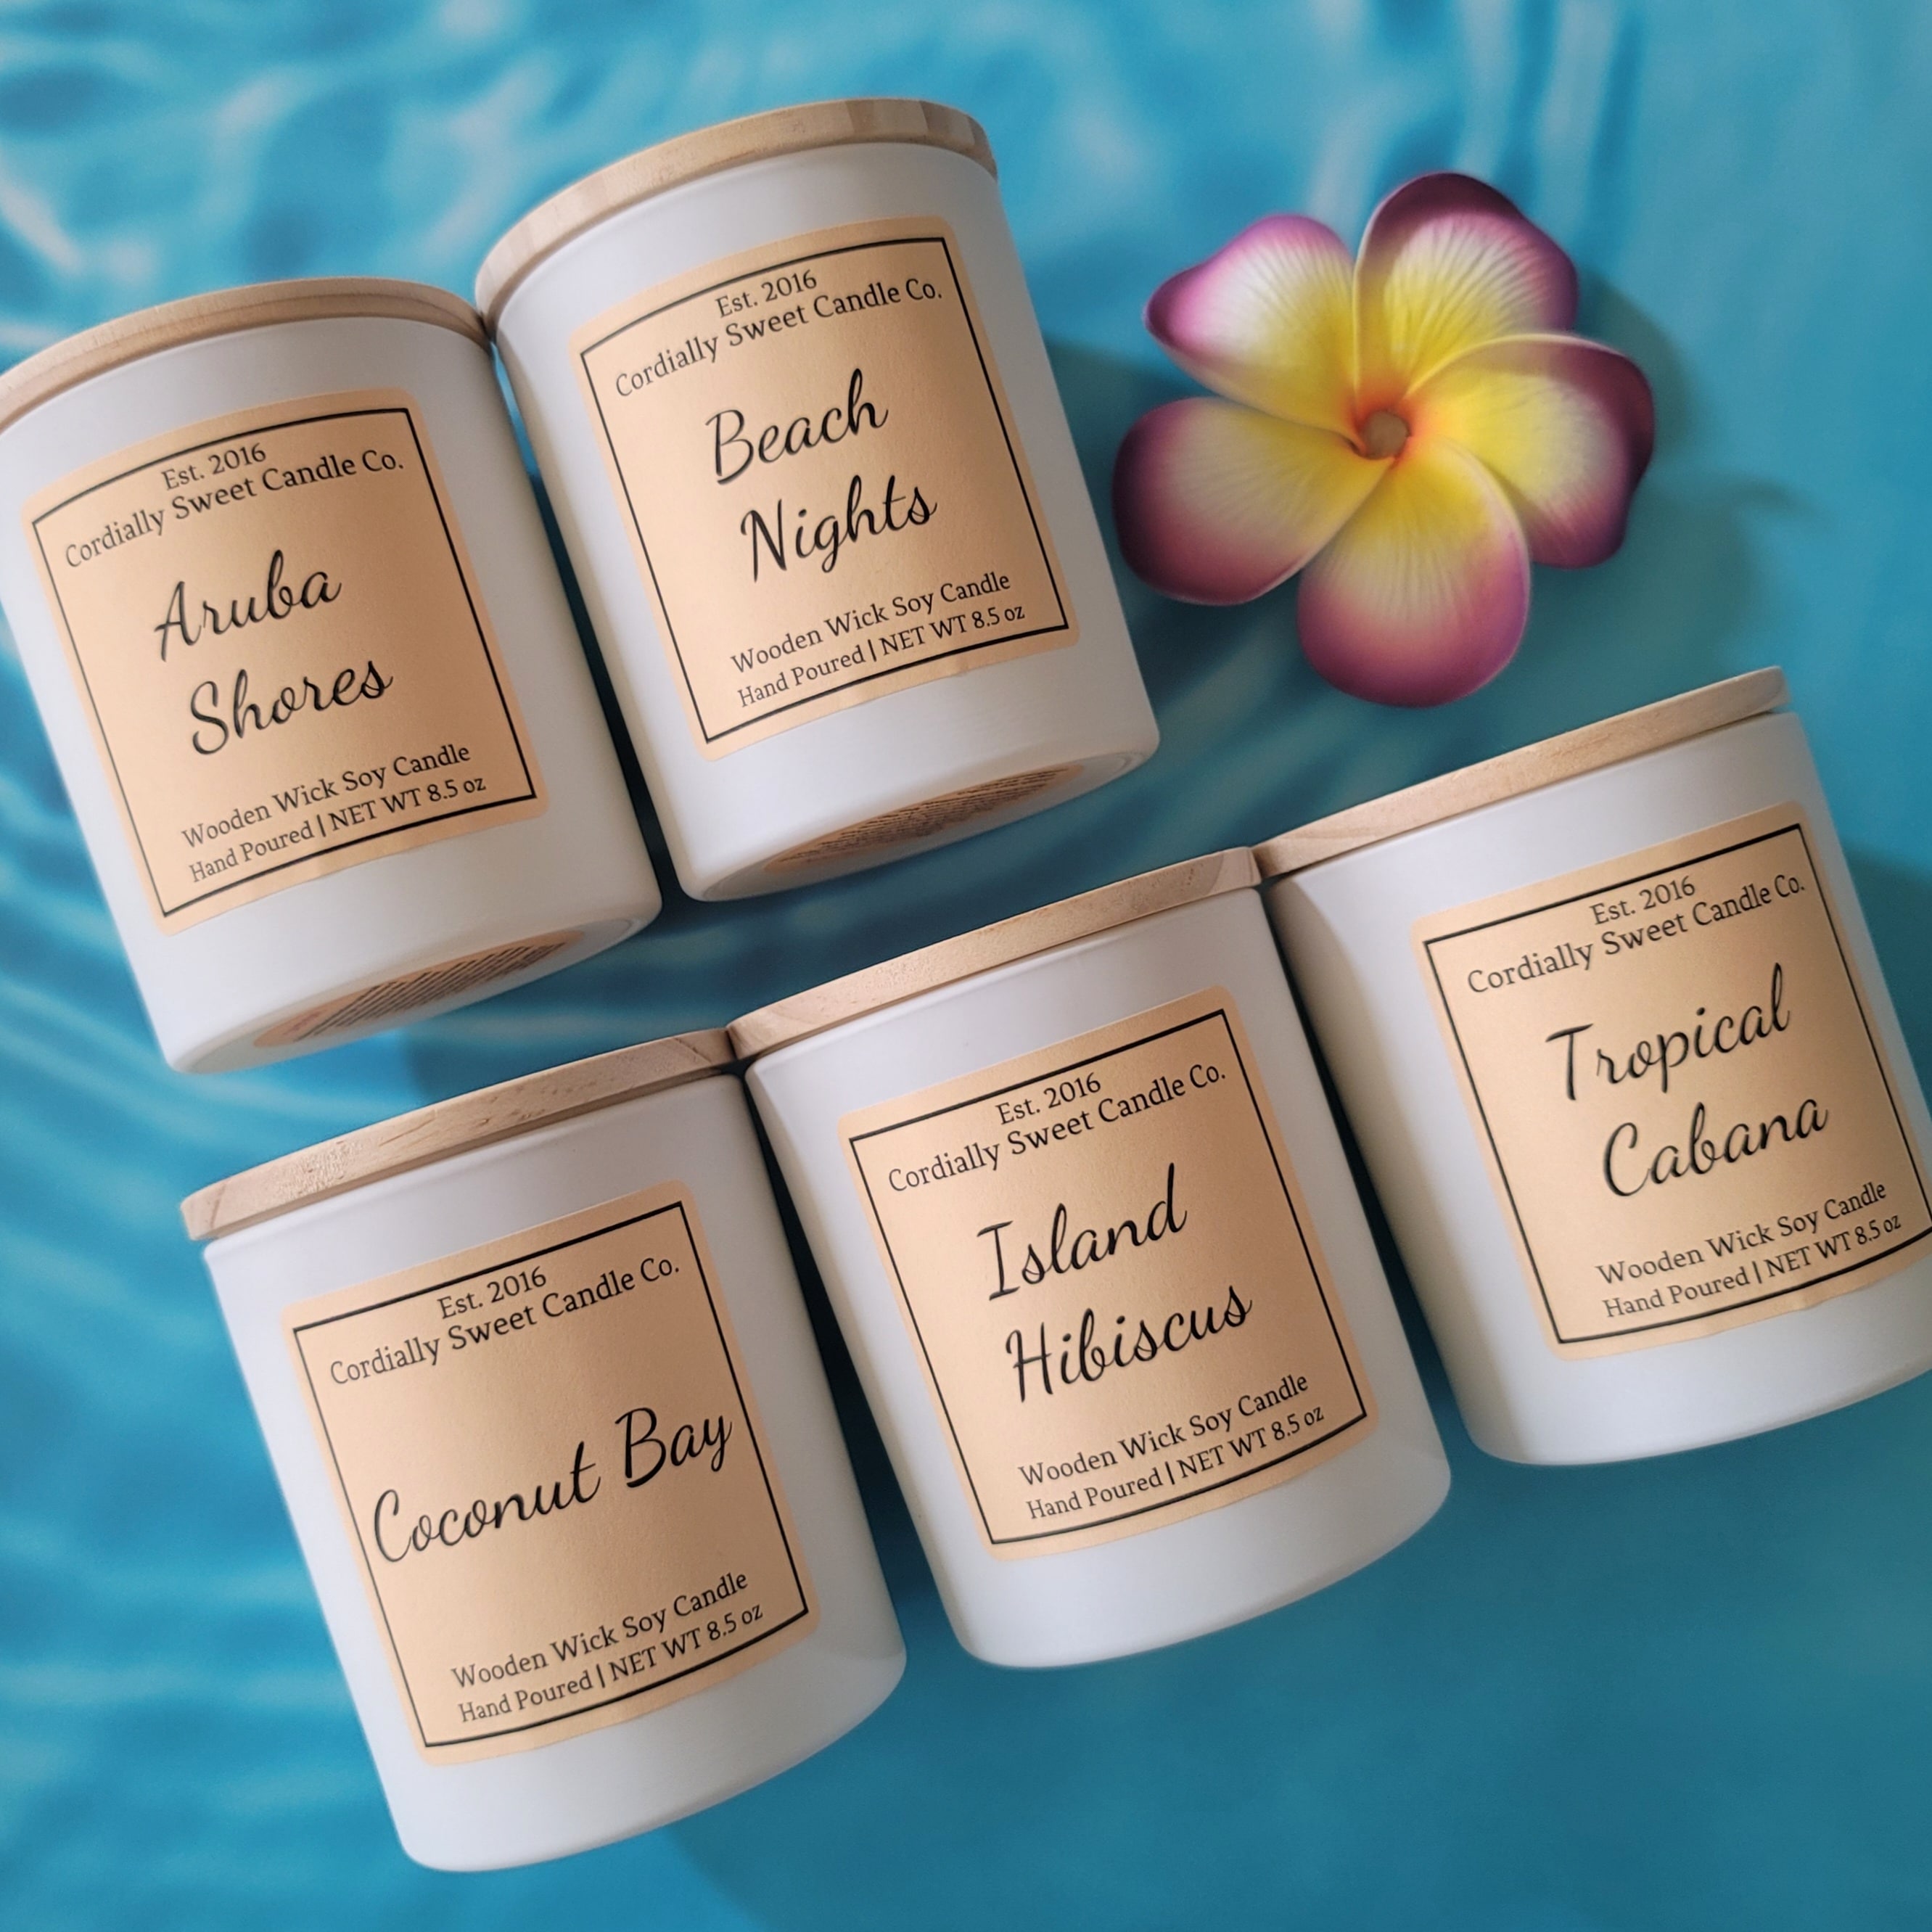 Cordially Sweet Candle Co.